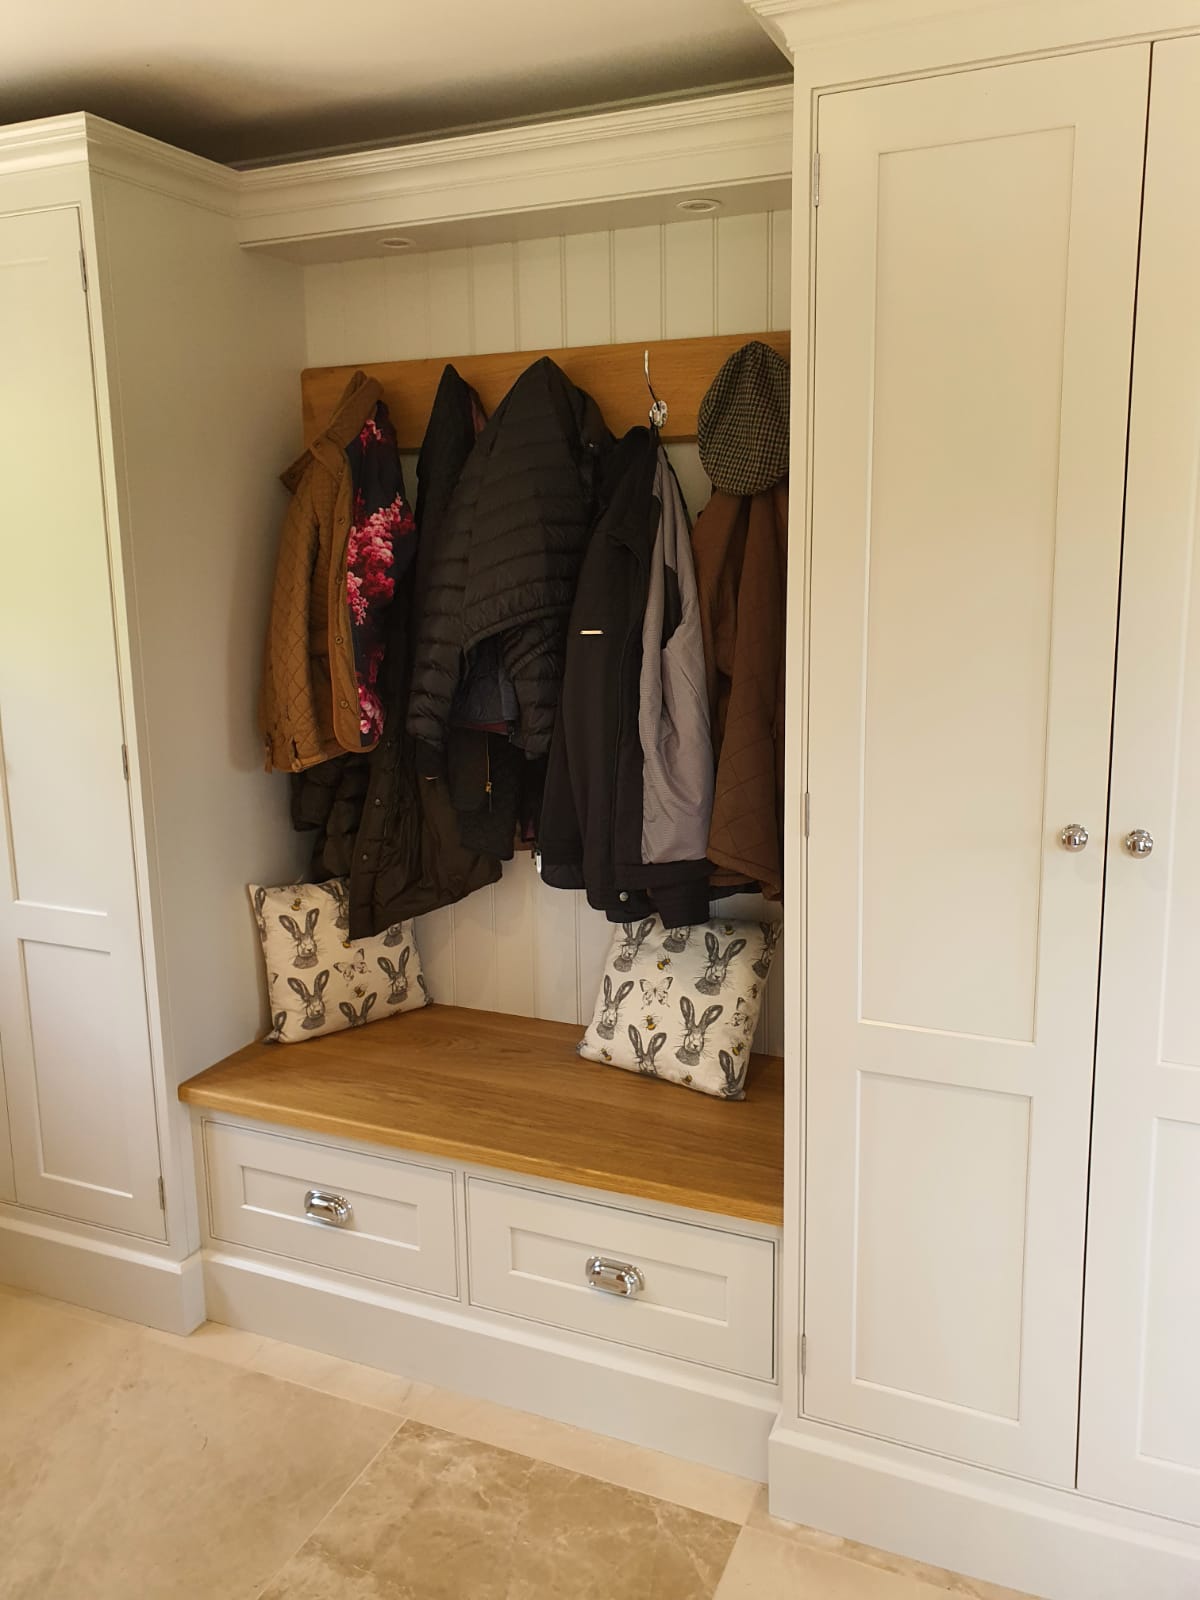 Take a look - Essential Family Boot Room, seamlessly integrated with the kitchen. Tall bowed storage ads wow. Contact us for more ideas.